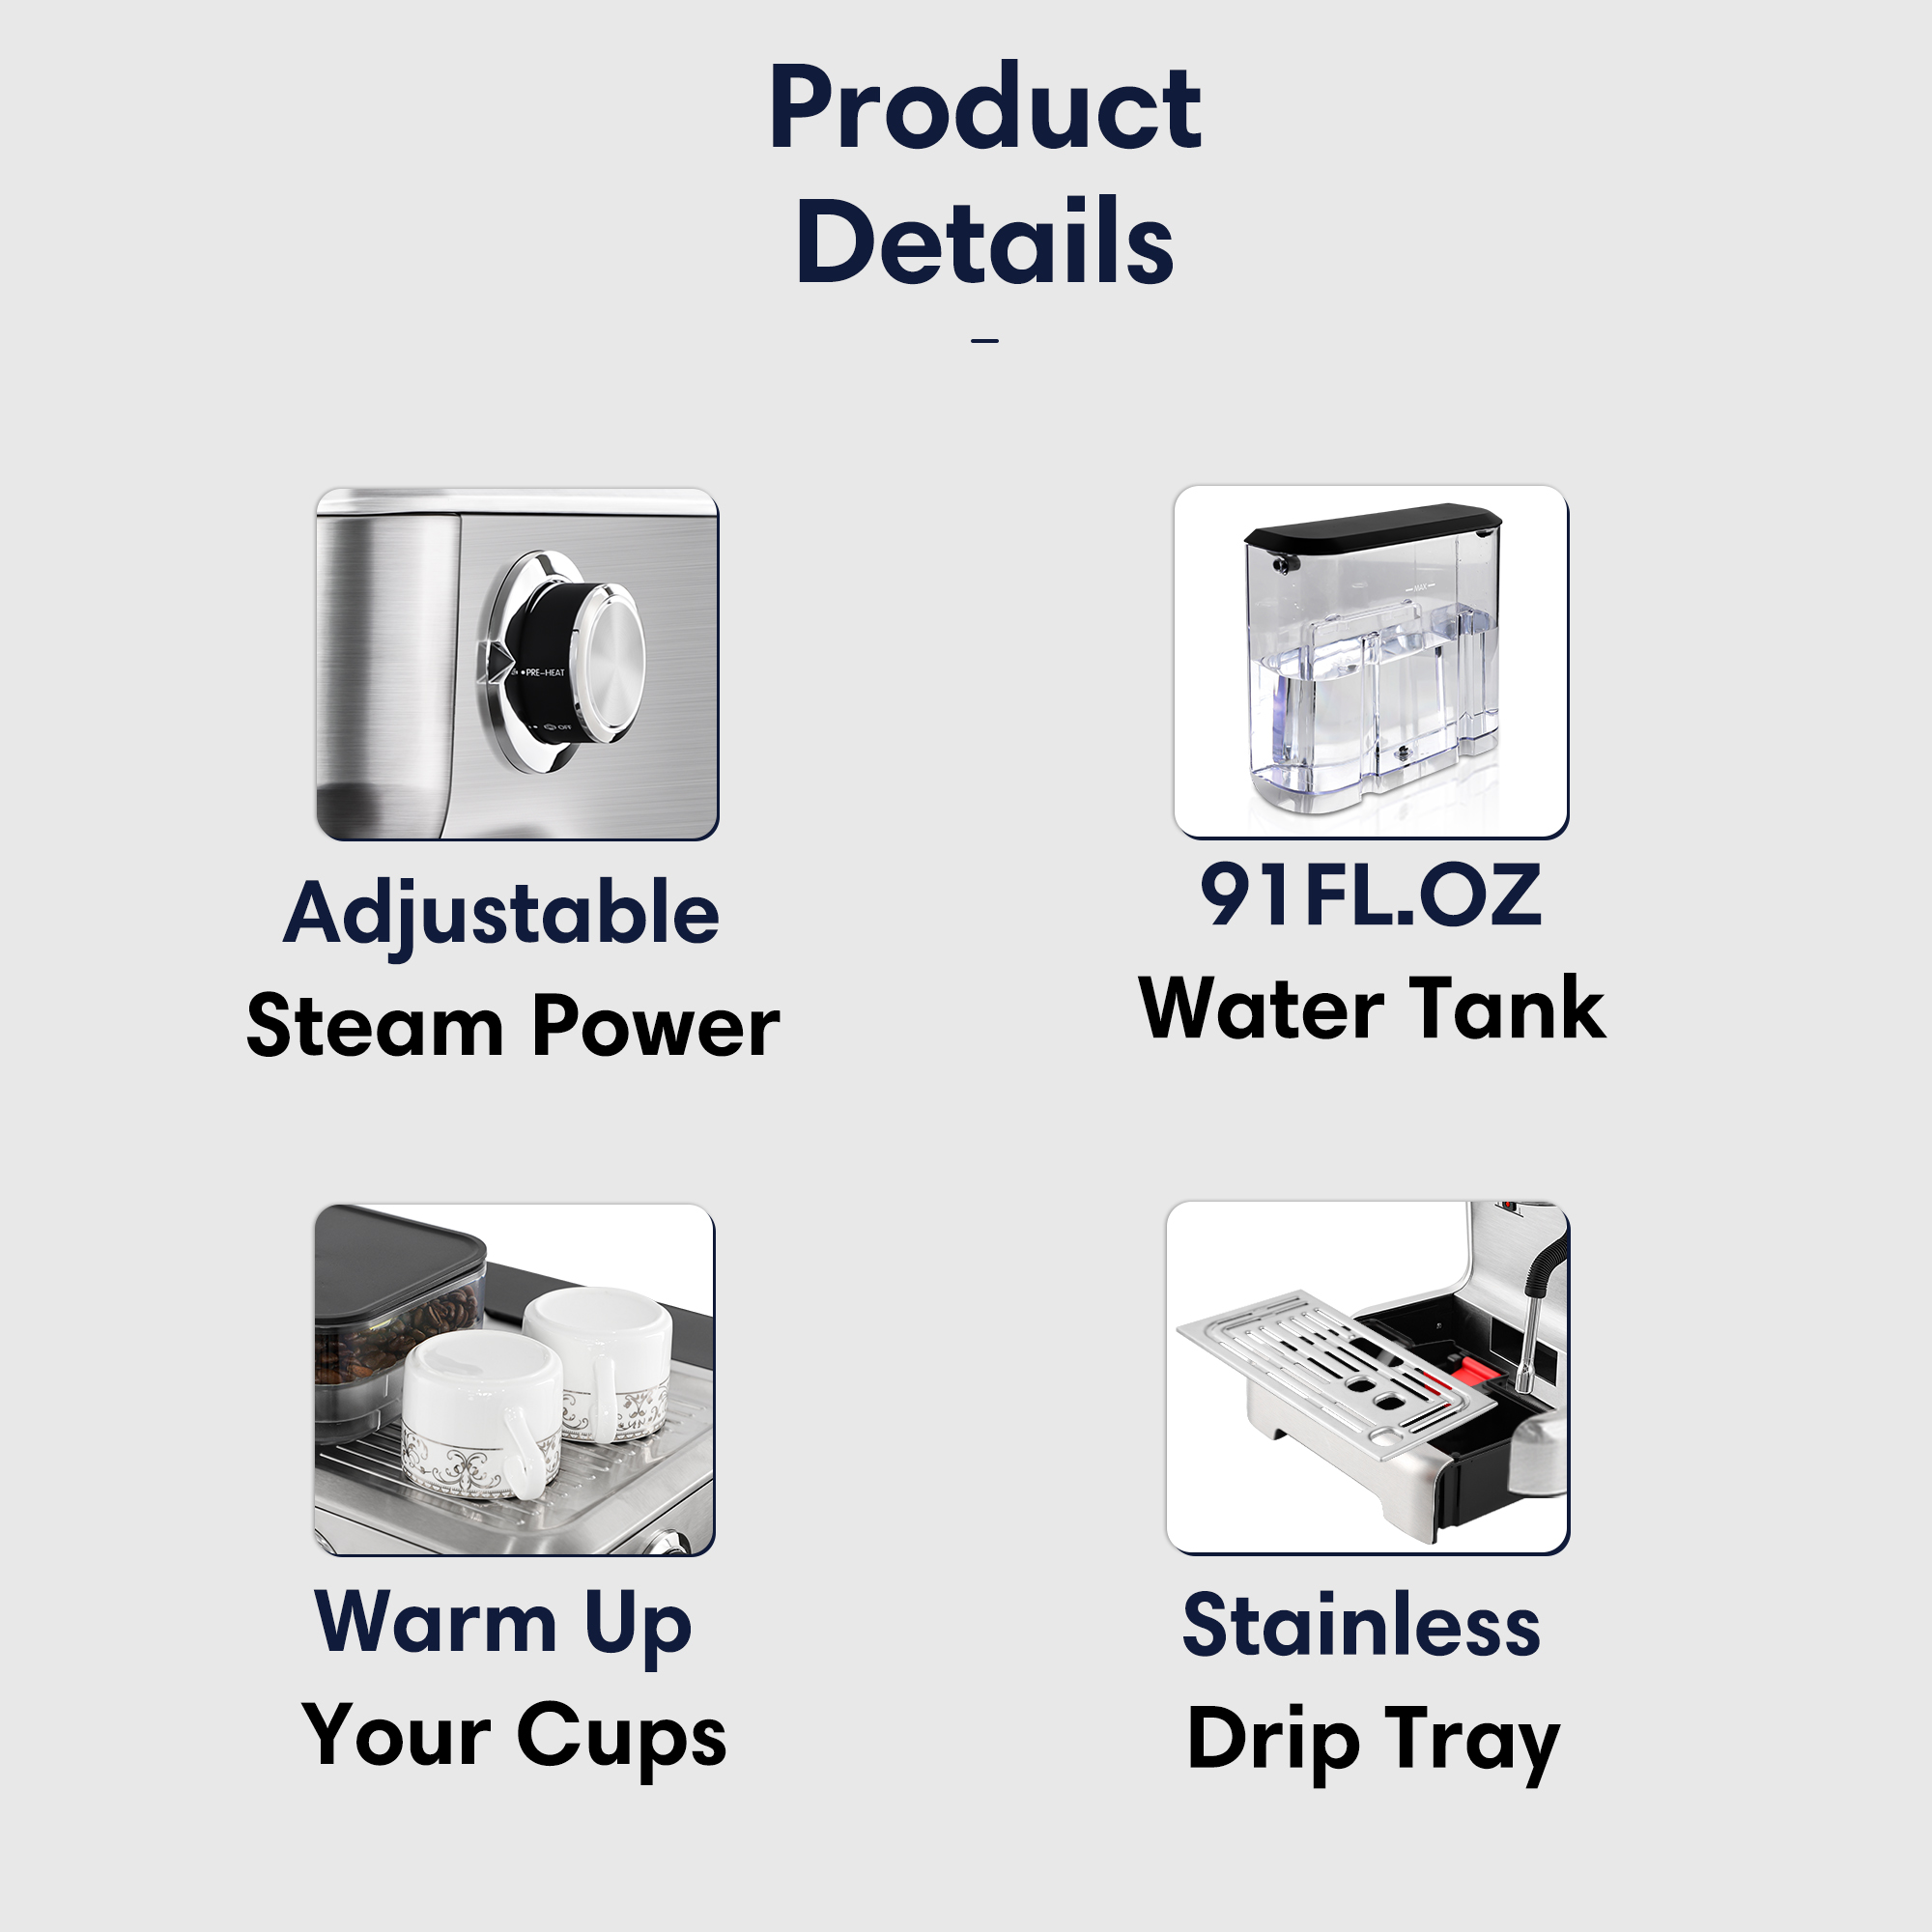 Sophiscated product details adjustable steam power 91oz water tank warm up your cups stainless drip tray